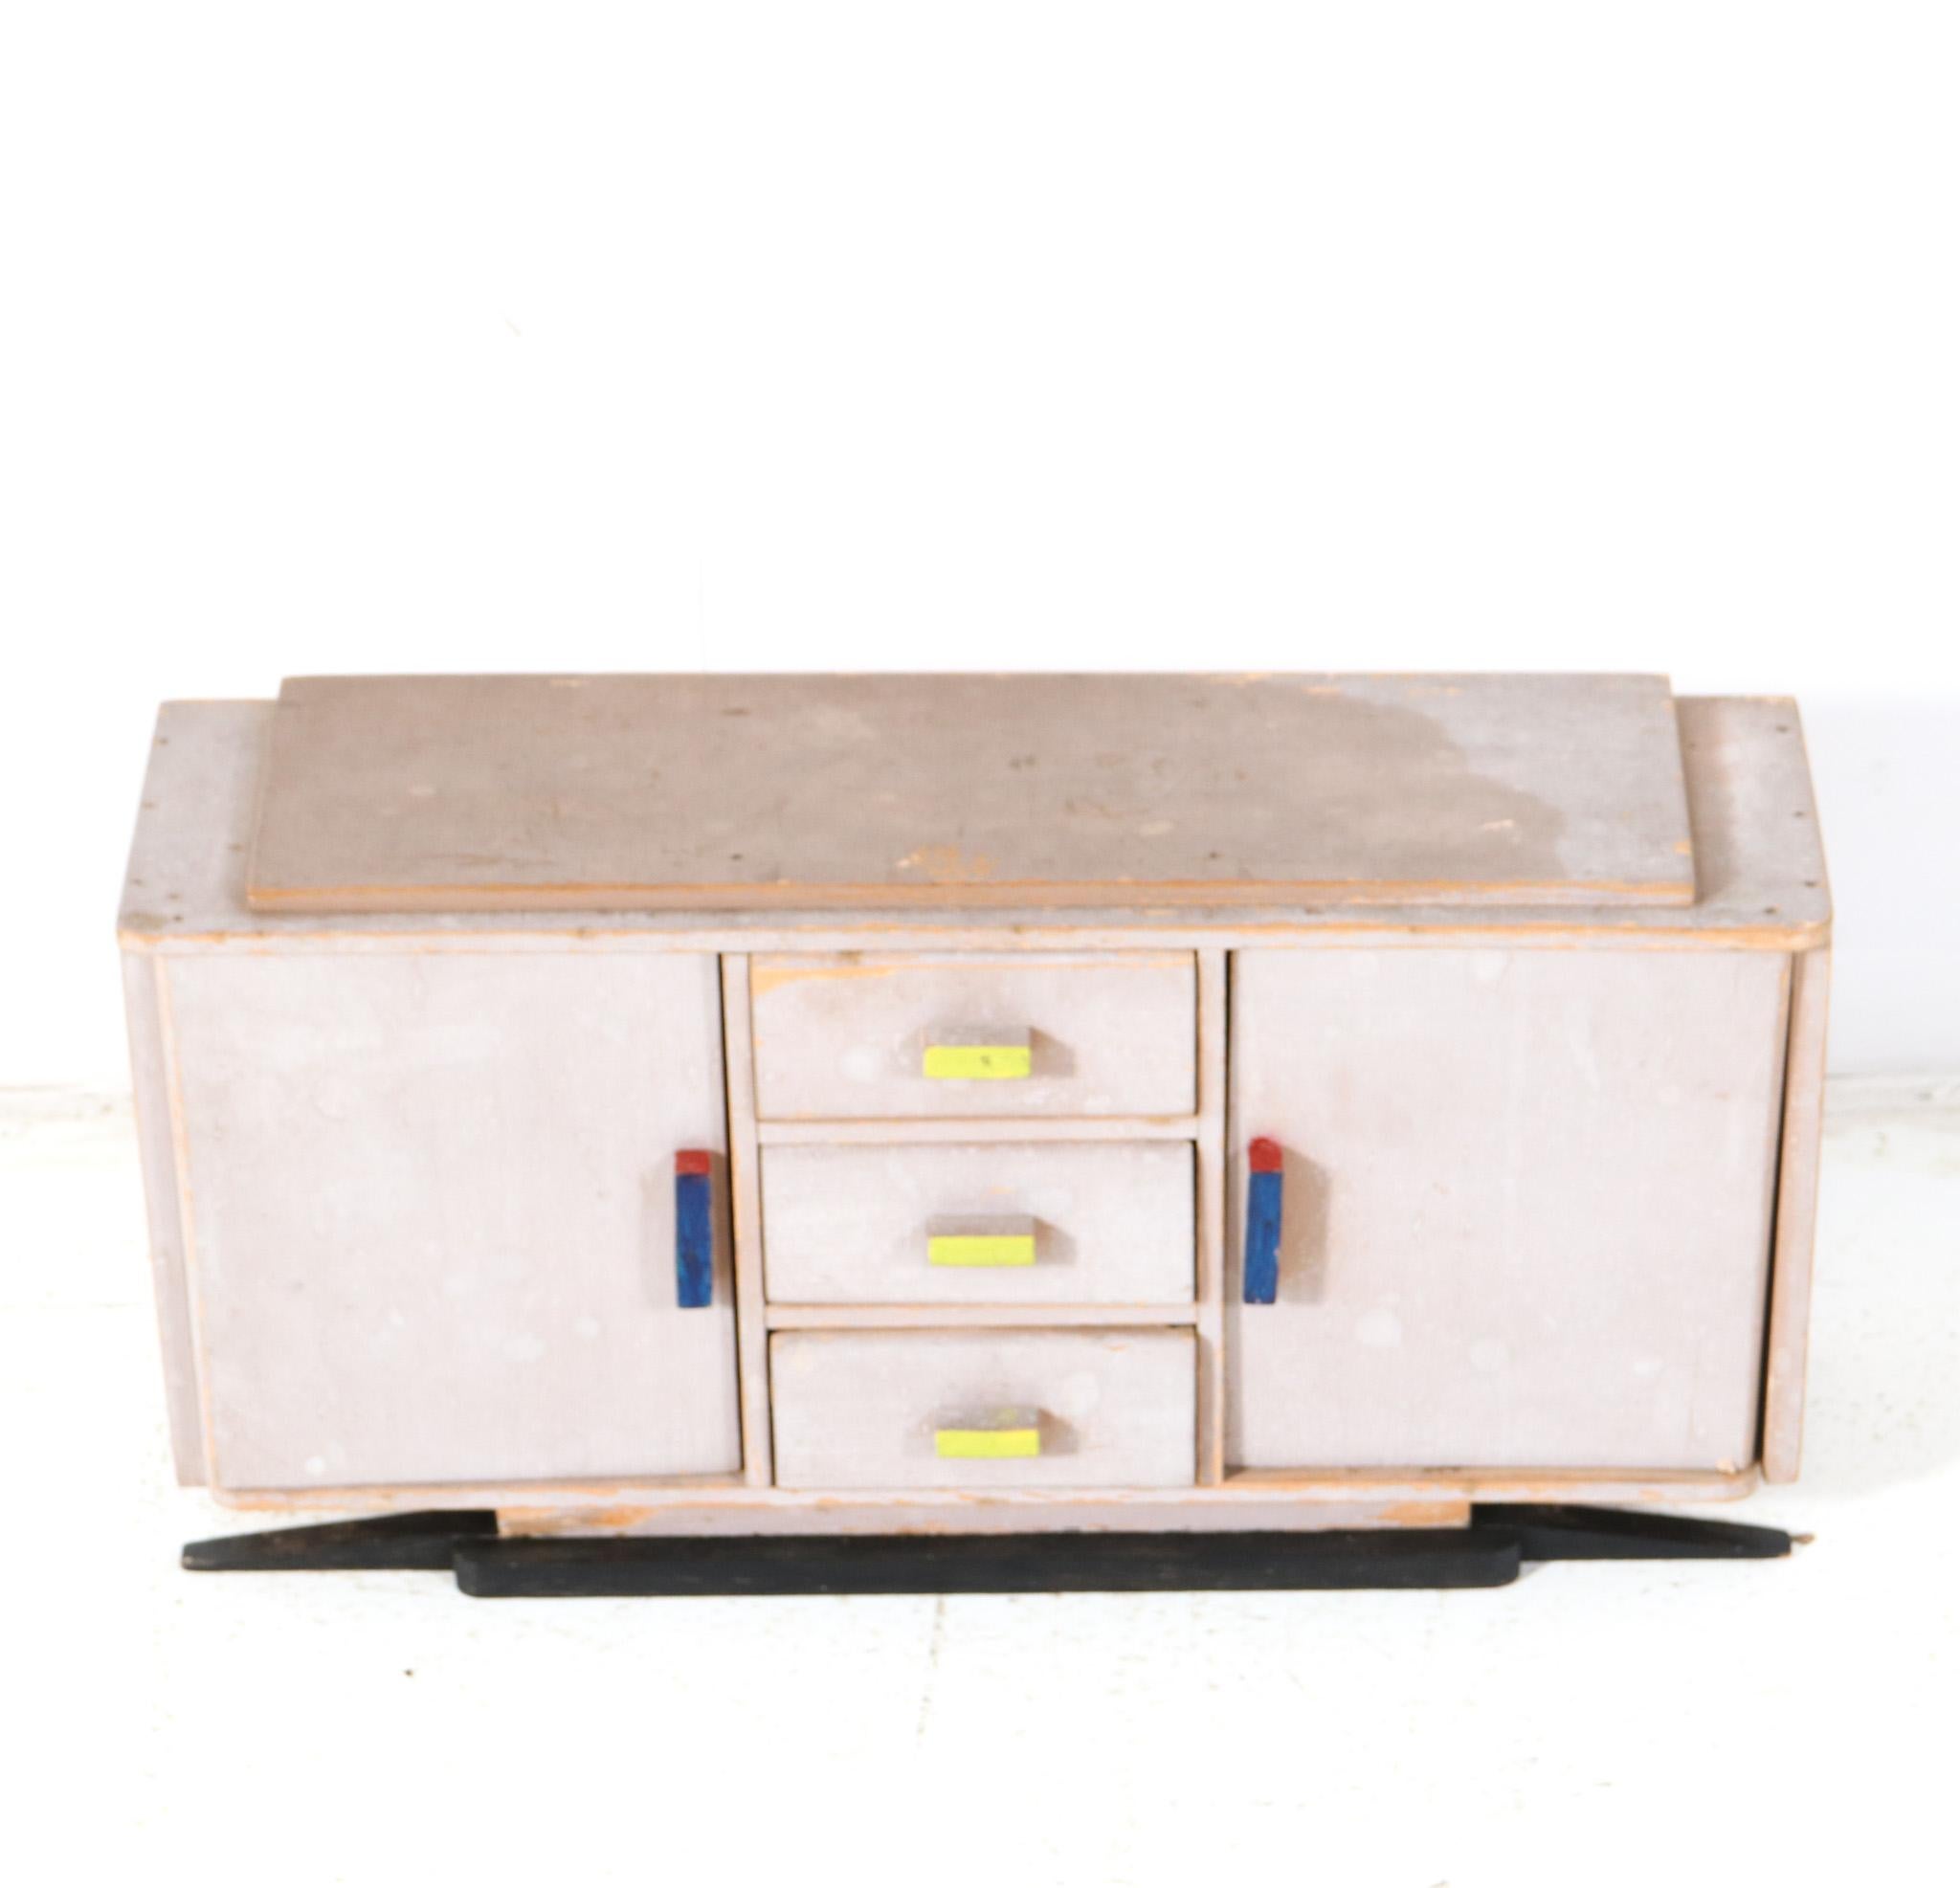 Stunning and rare Art Deco Modernist children's furniture credenza.
Striking Dutch design from the 1930s.
Original lacquered plywood base with hand-painted multi-colored handles.
This wonderful Art Deco Modernist children's furniture credenza is in